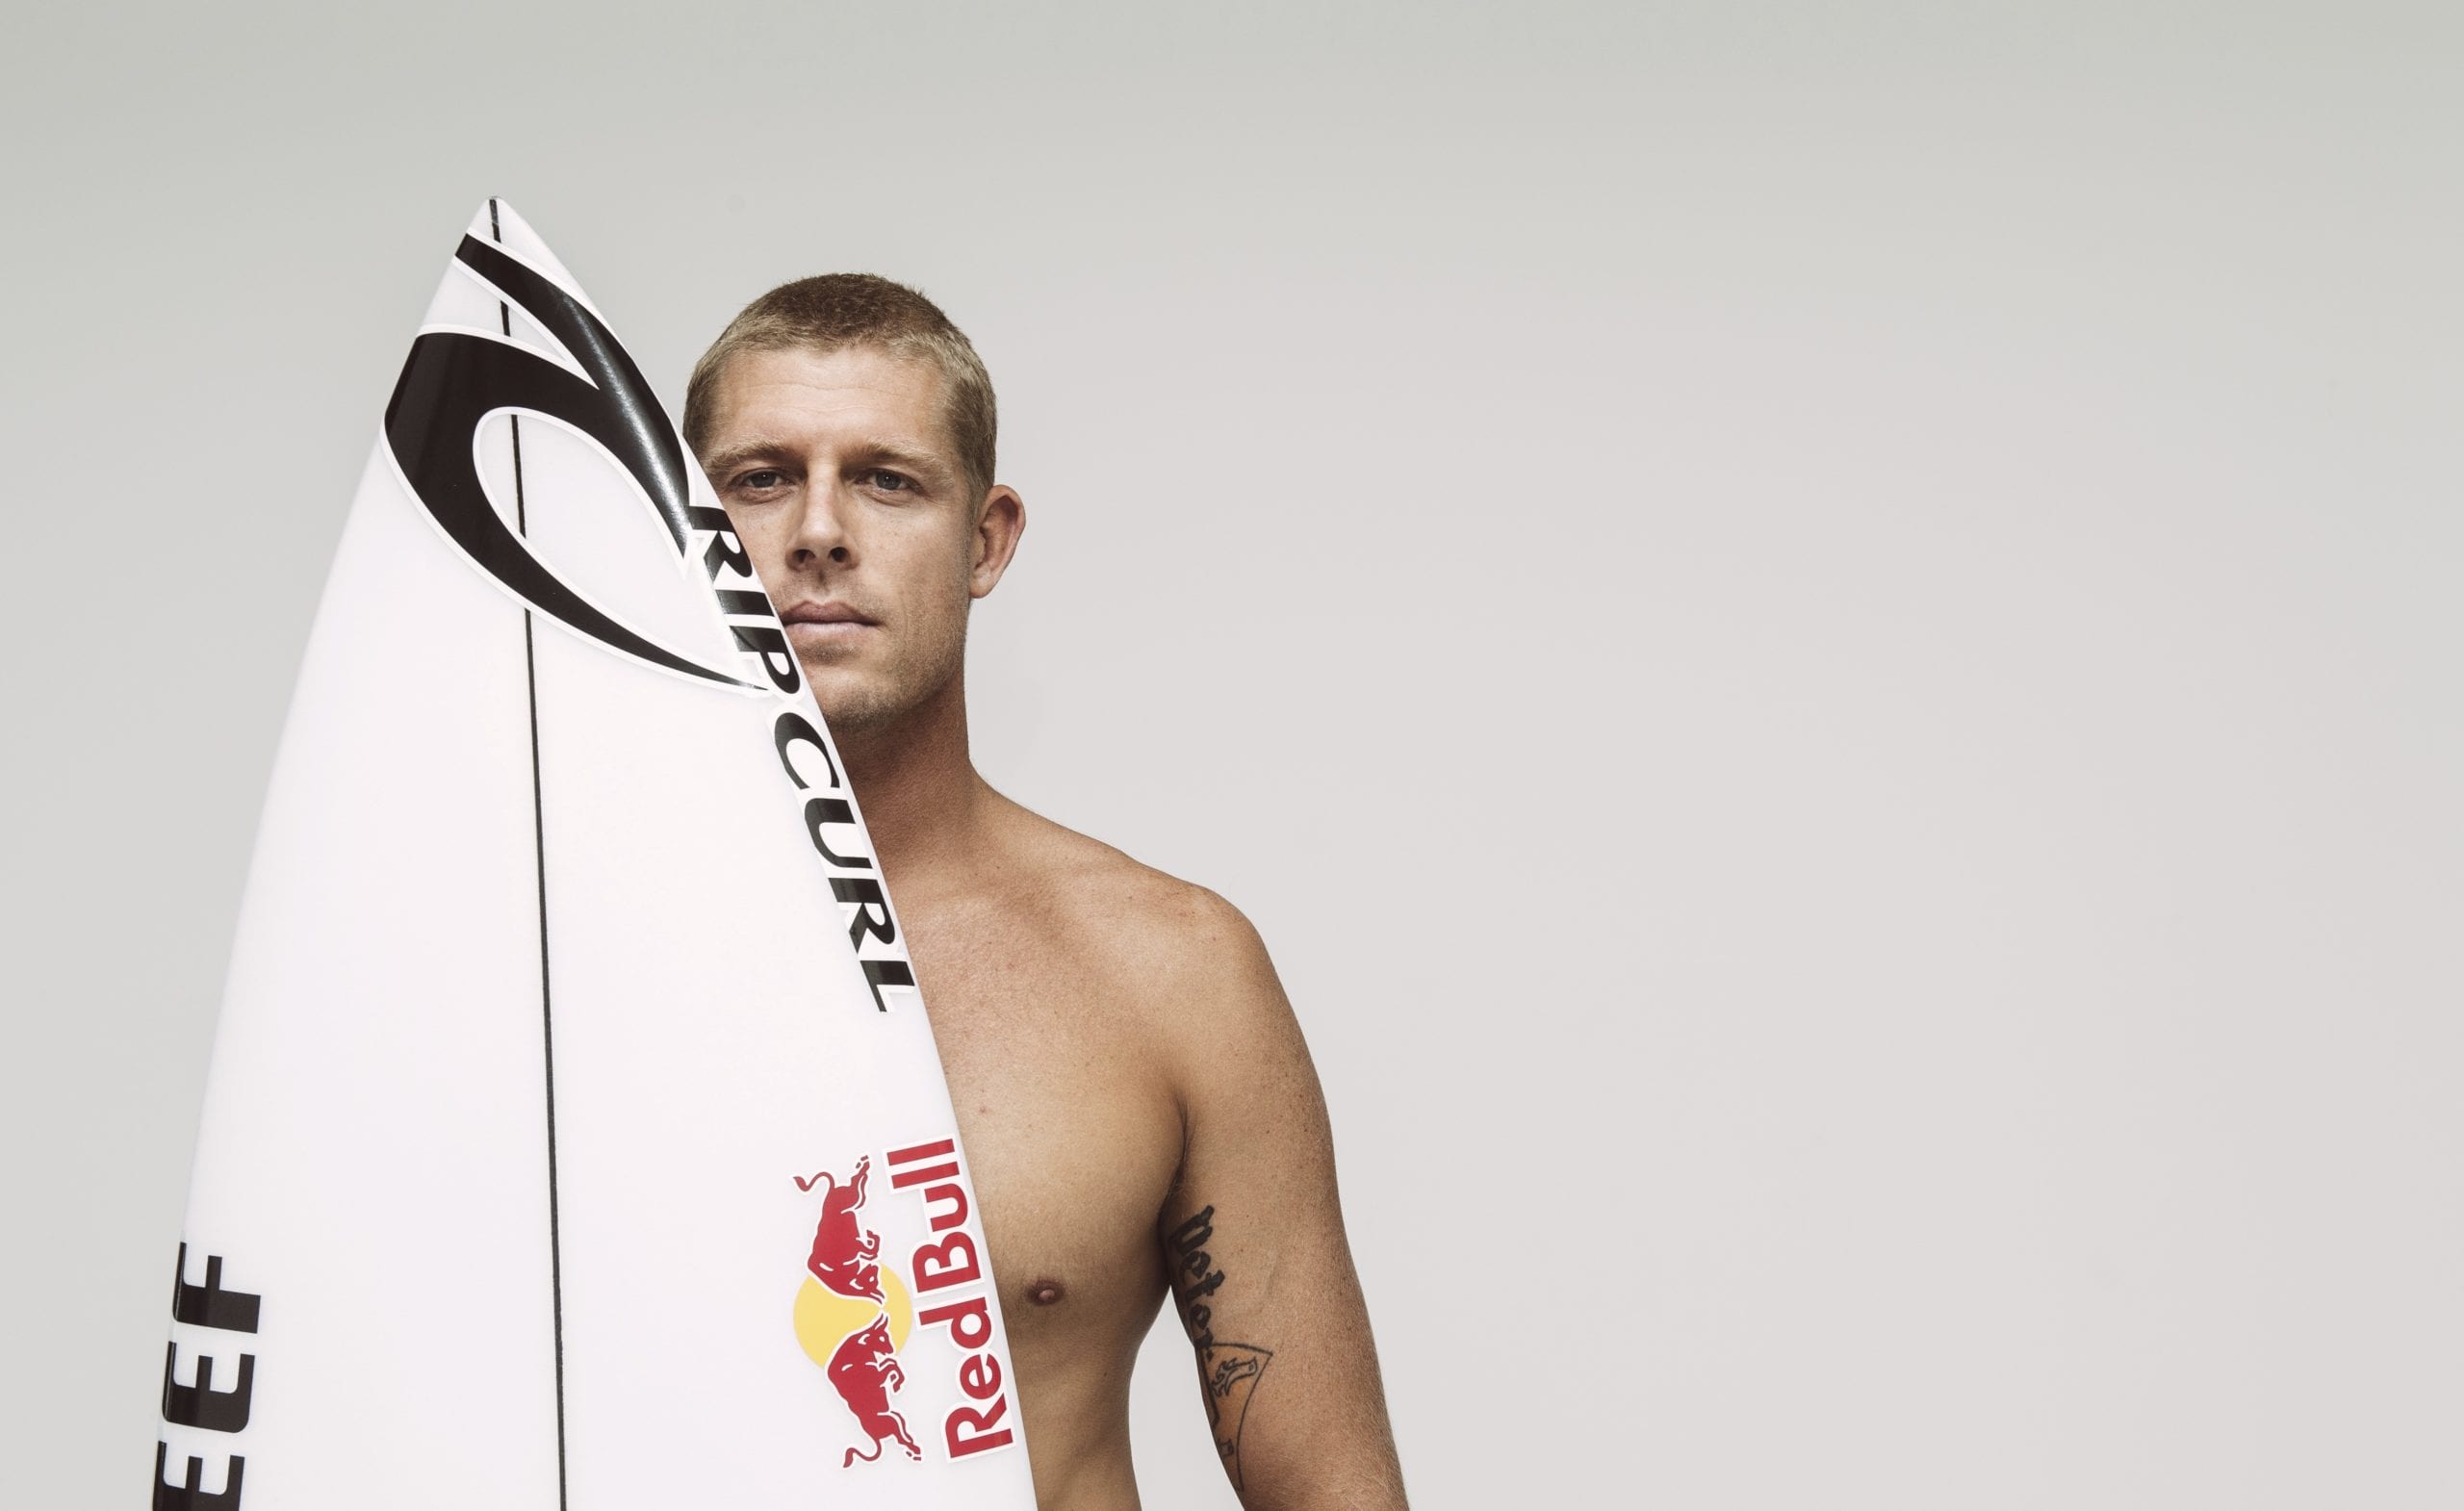 Mick Fanning poses for a portrait in Gold Coast, Queensland on February 4, 2018 // Corey Wilson/Red Bull Content Pool // AP-1UVU6NQN52111 // Usage for editorial use only //